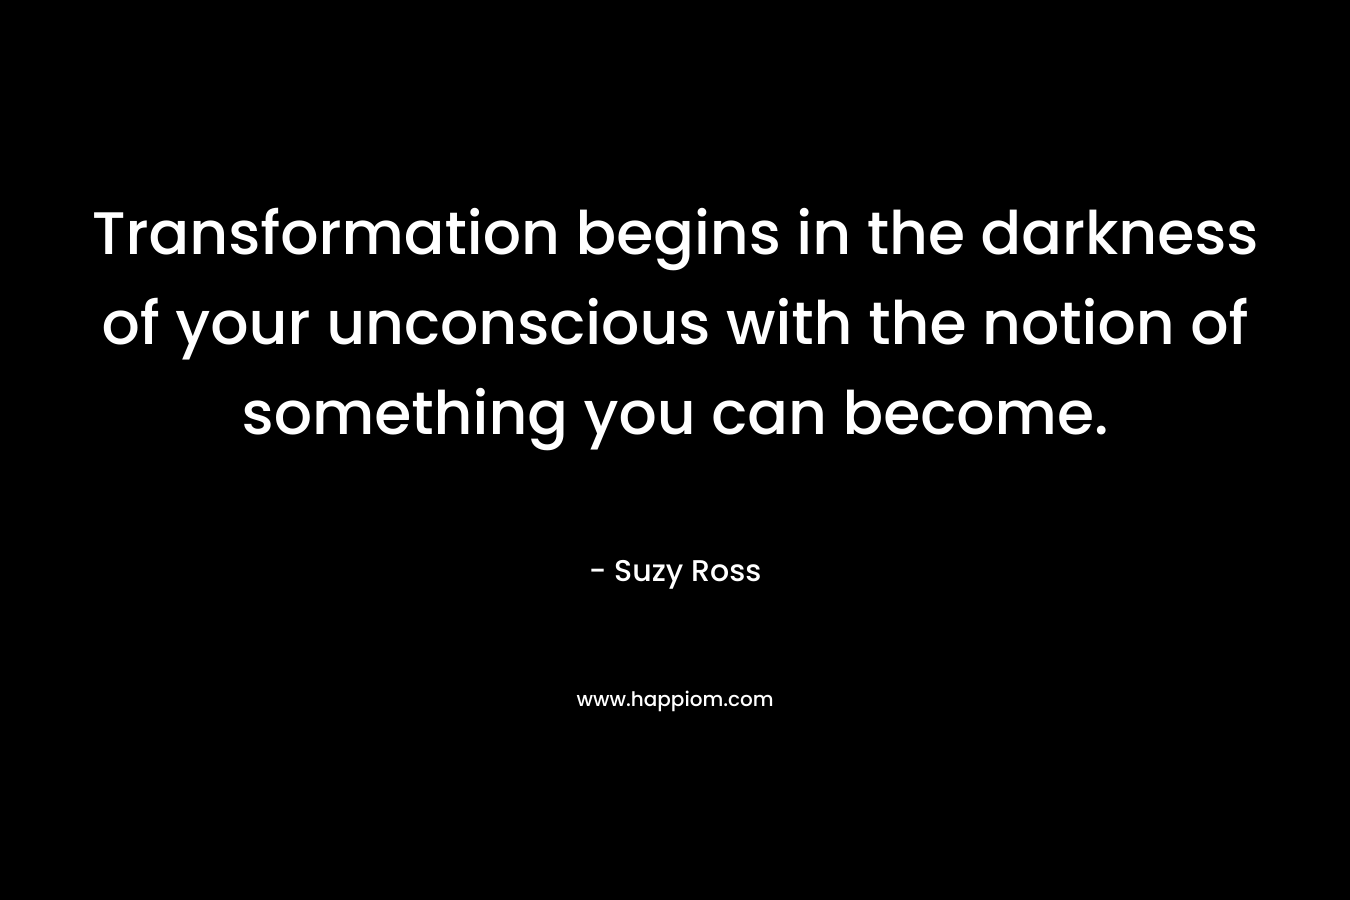 Transformation begins in the darkness of your unconscious with the notion of something you can become. – Suzy Ross